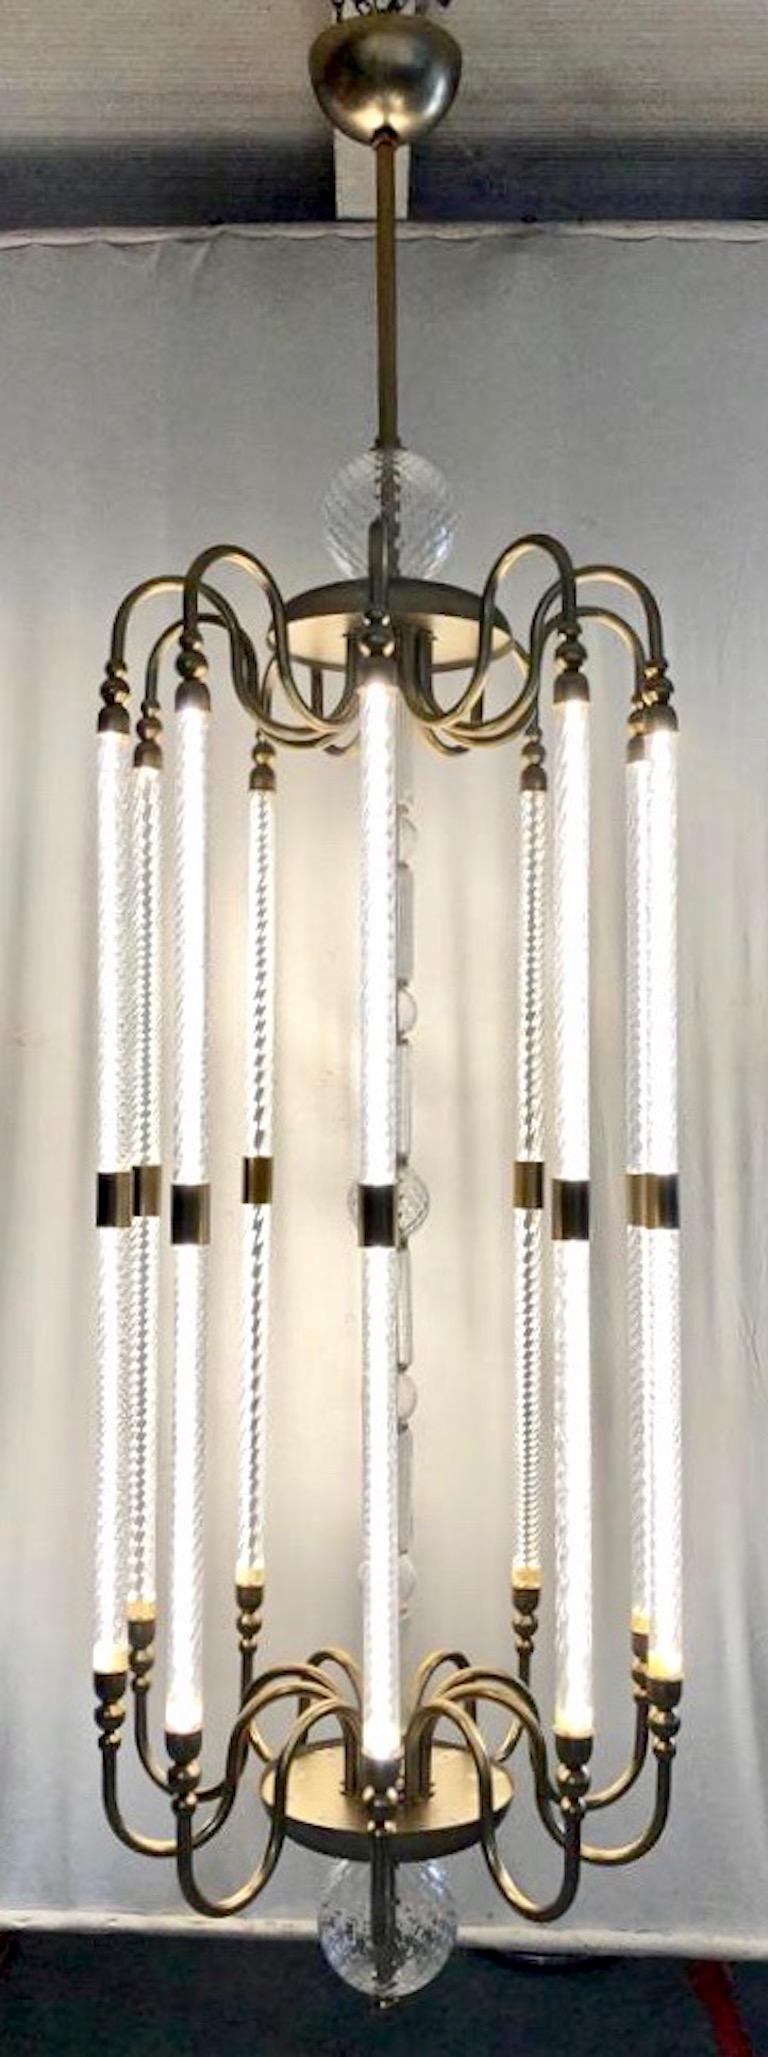 A modern creation by Cosulich Interiors & Antiques with an Art Deco flair, entirely hand made in Italy. This exclusive item is customizable in sizes and finishes. The light and open organic design represents a stylized lantern, the handcrafted metal